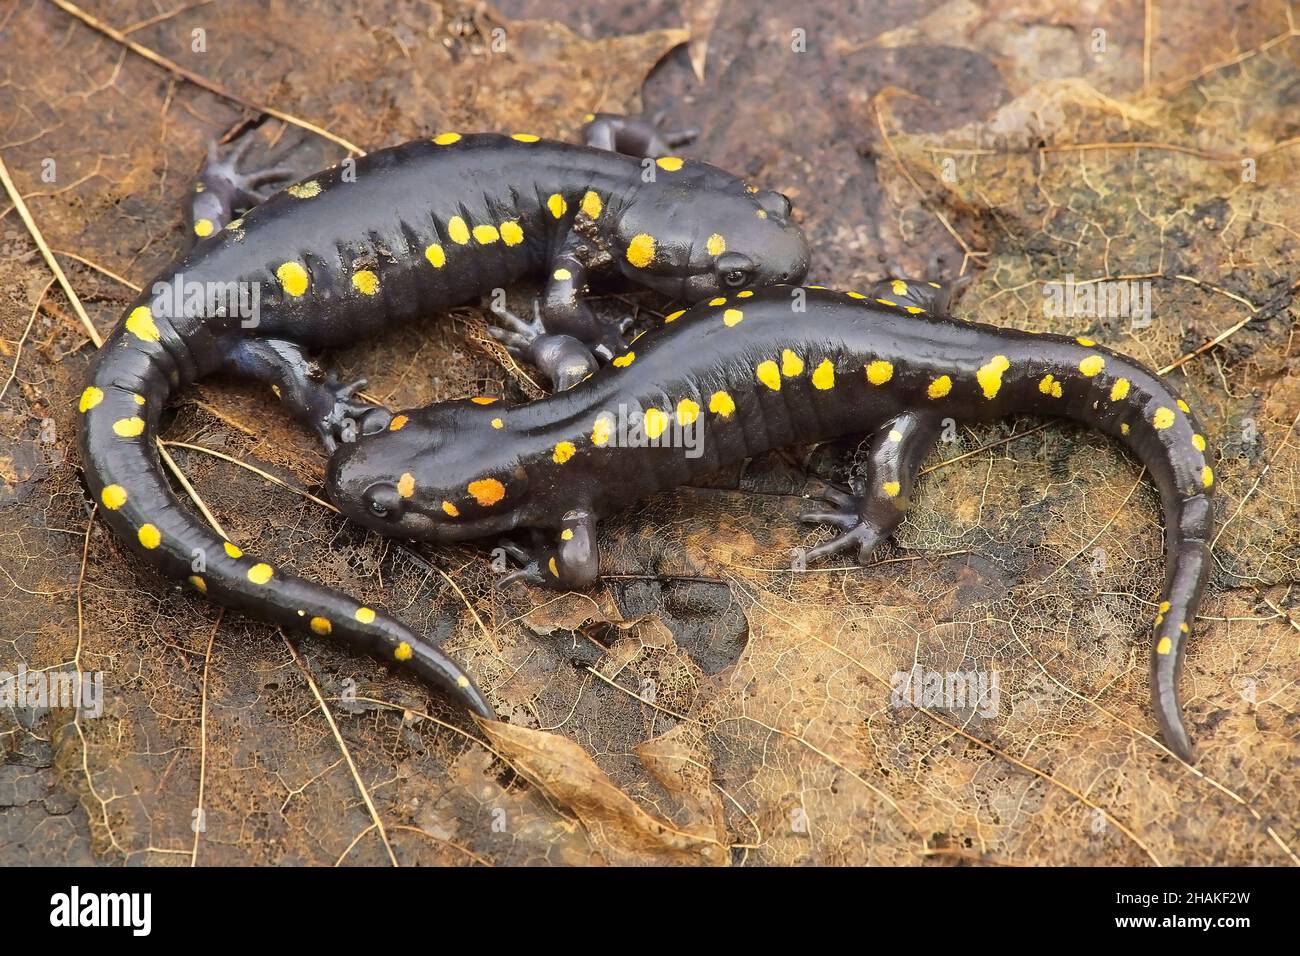 Pair of Yellow-spotted salamanders (Ambystoma maculatum) on leaf, near vernal pond, Eastern United States, by Skip Moody/Dembinsky Photo Assoc Stock Photo